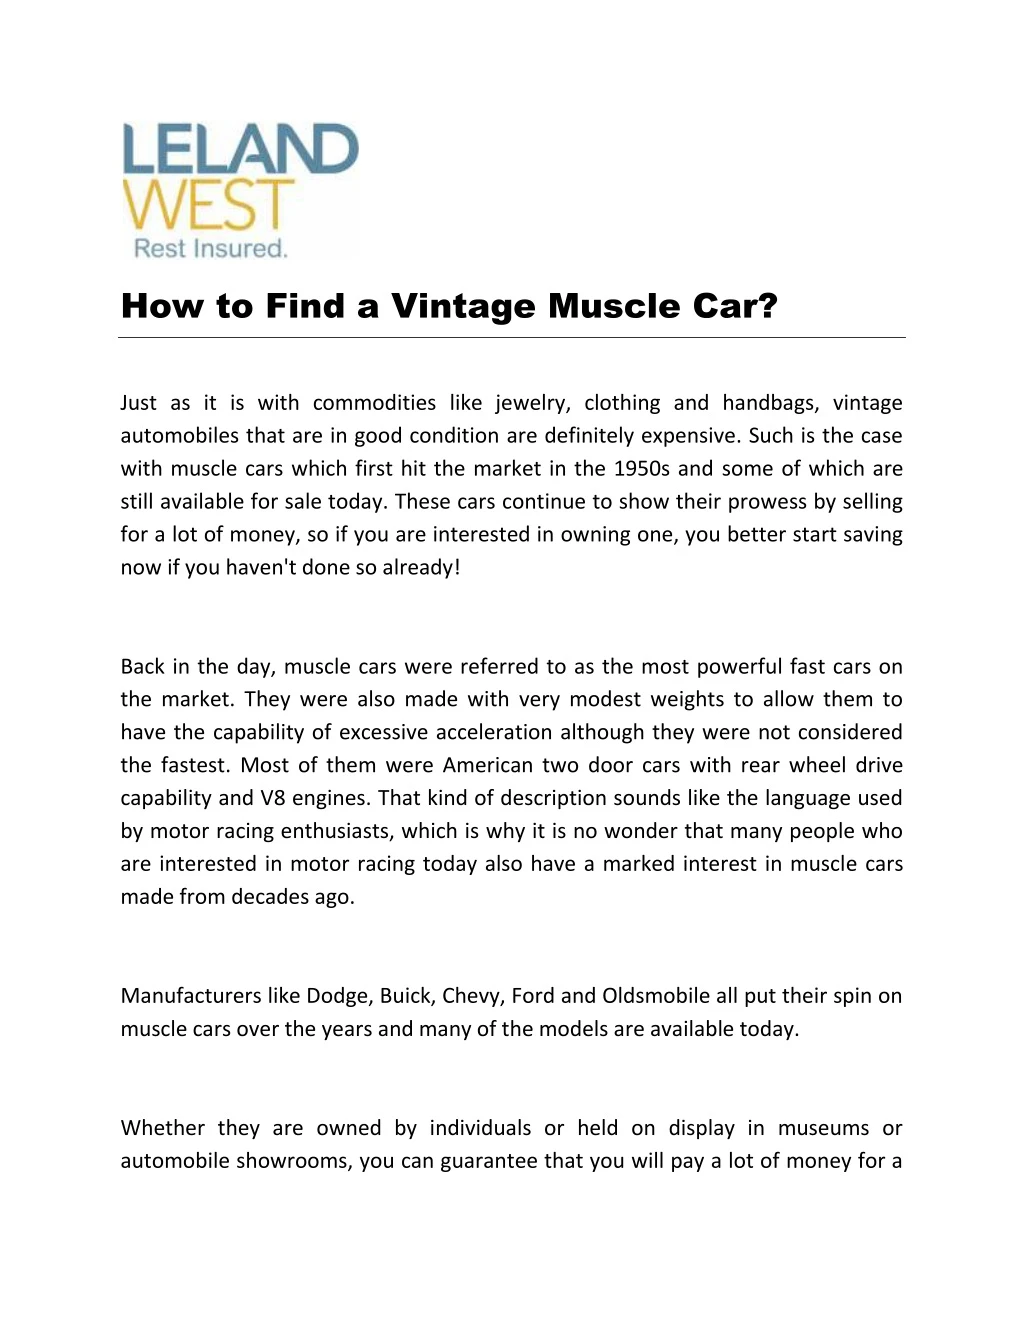 how to find a vintage muscle car